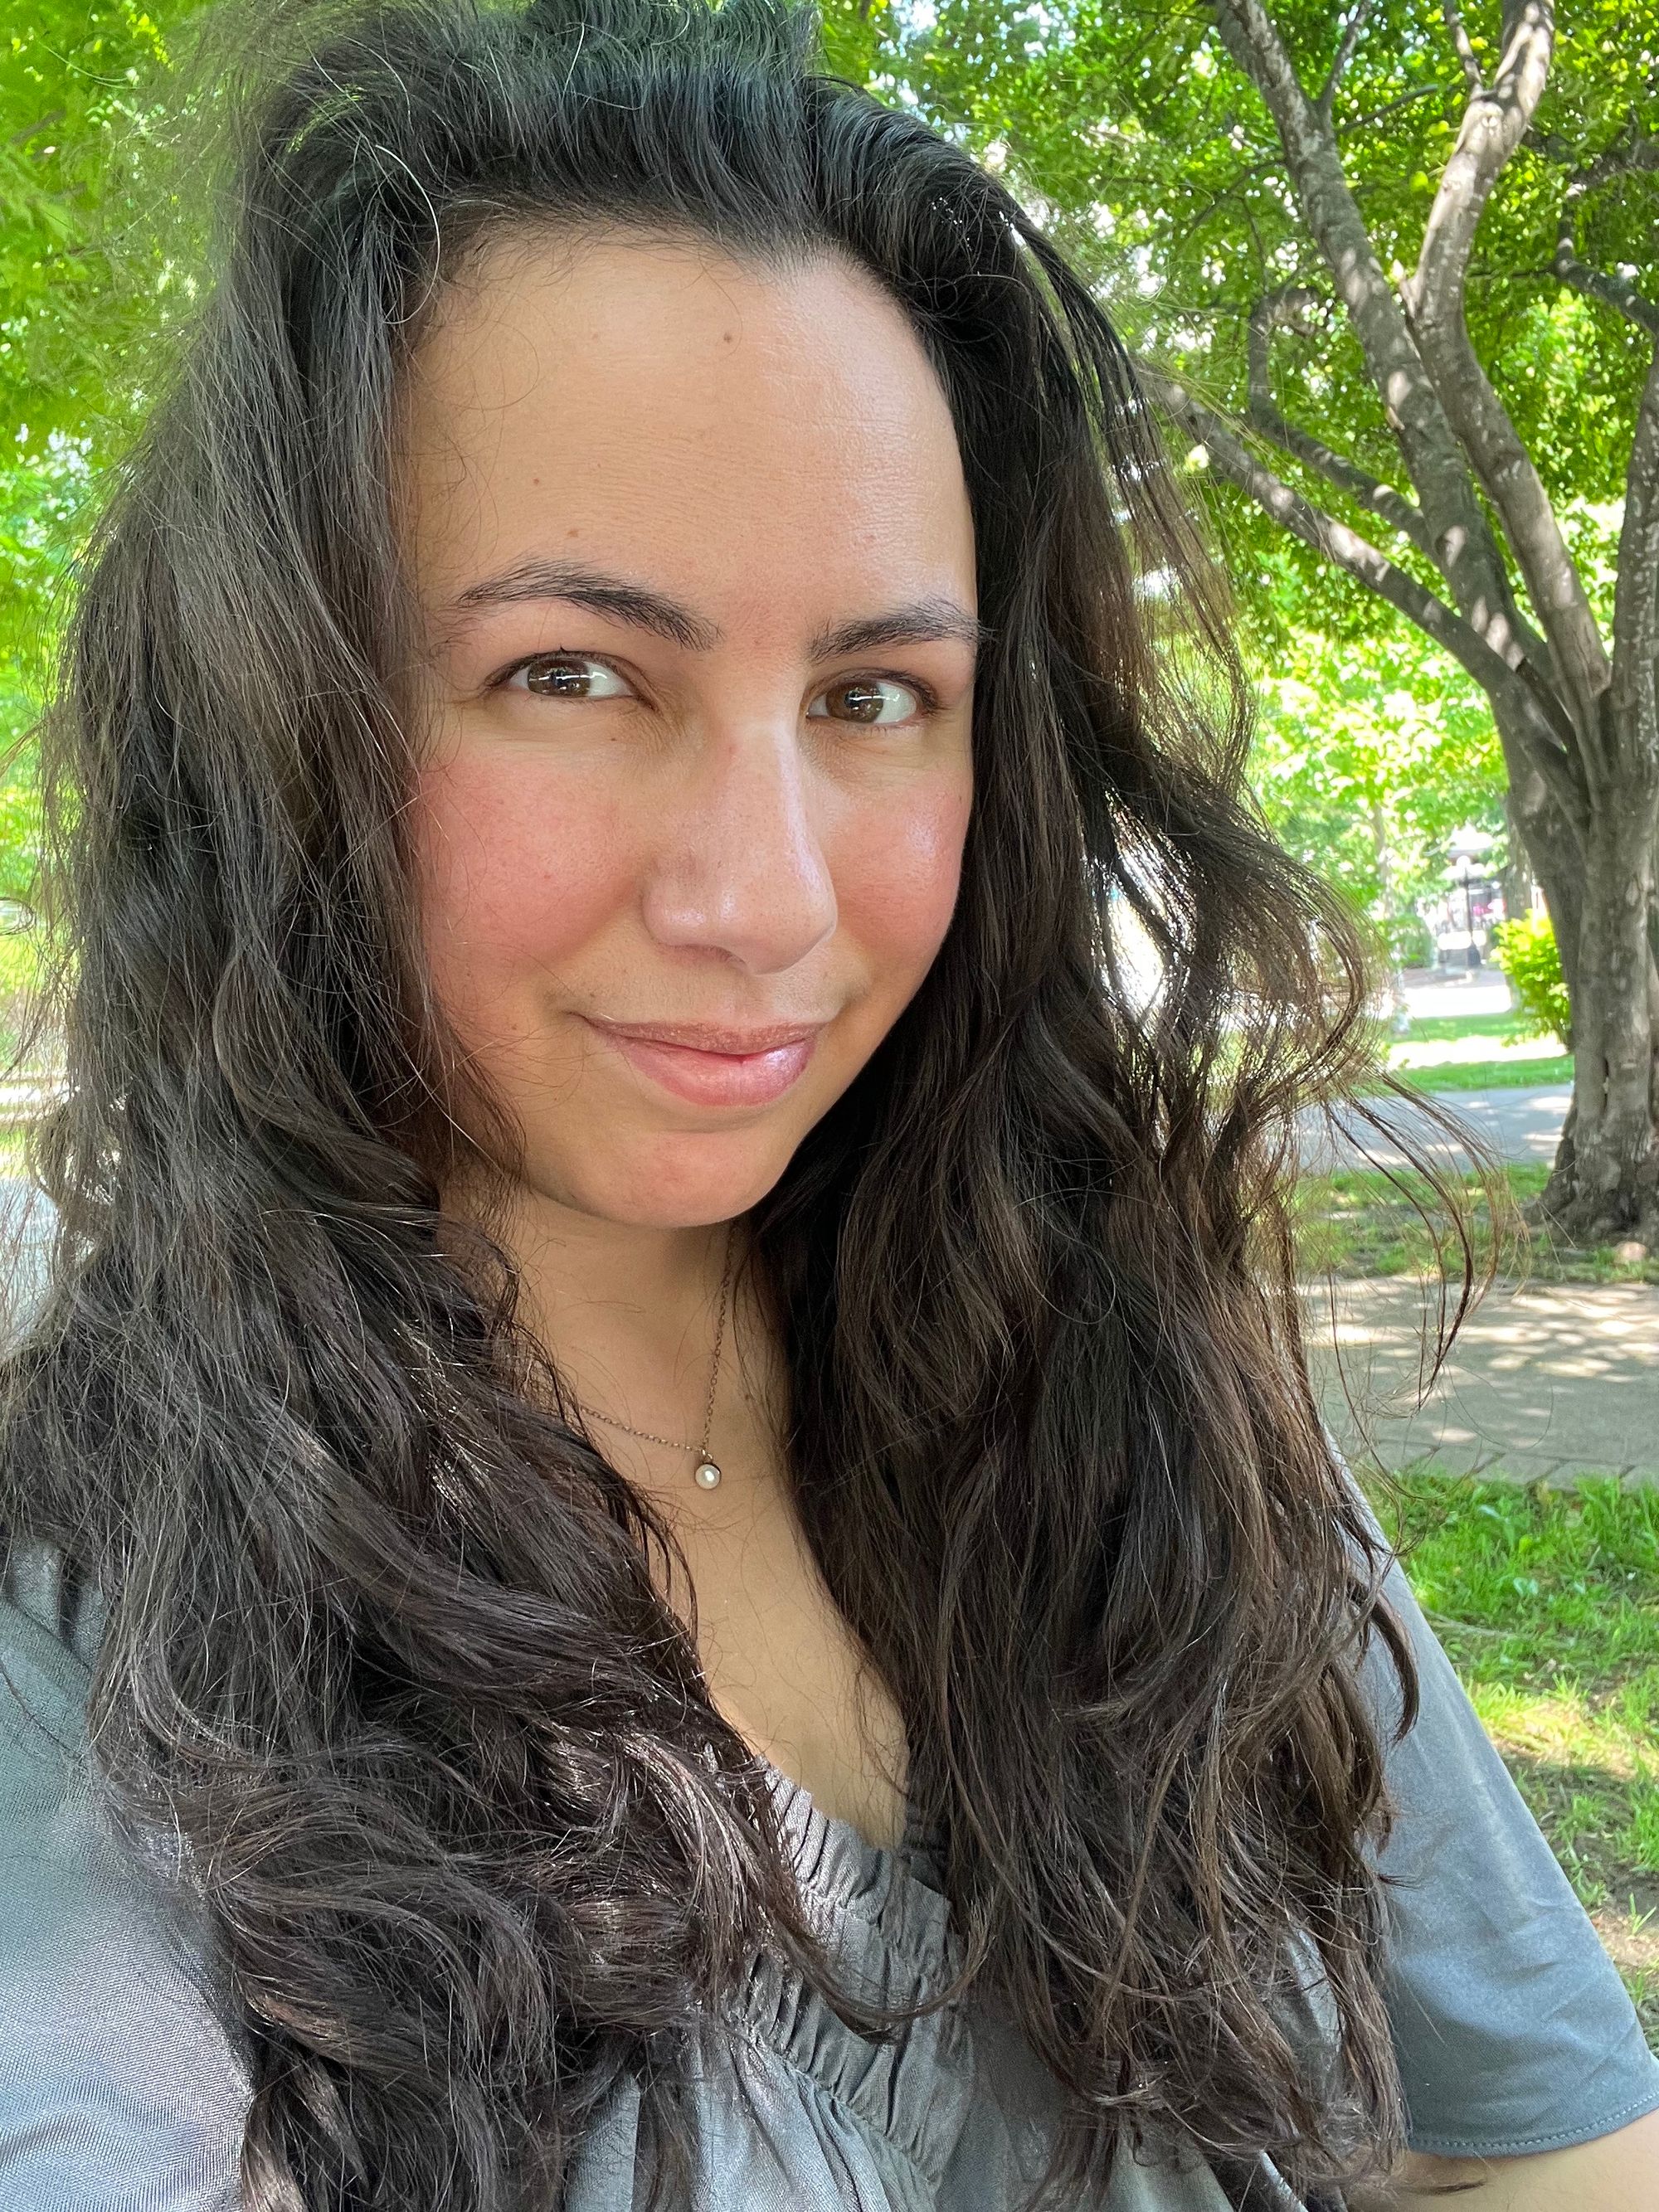 Softly lit park selfie in which I’m wearing my long dark hair loose over a grey silk top with a plunging pleated neckline and loose, fluttering sleeves.